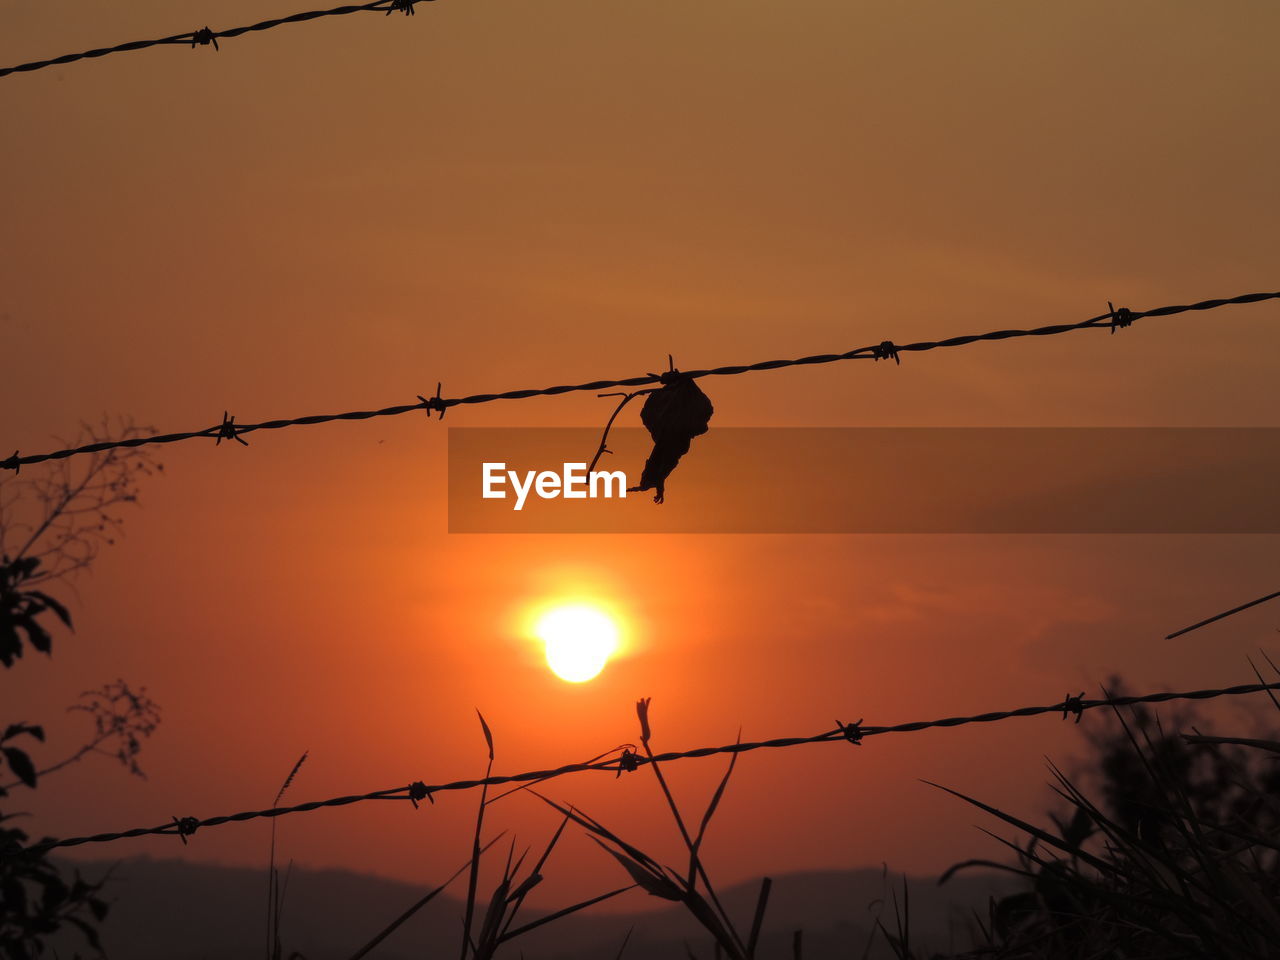 Silhouette of barbed wire against sky during sunset